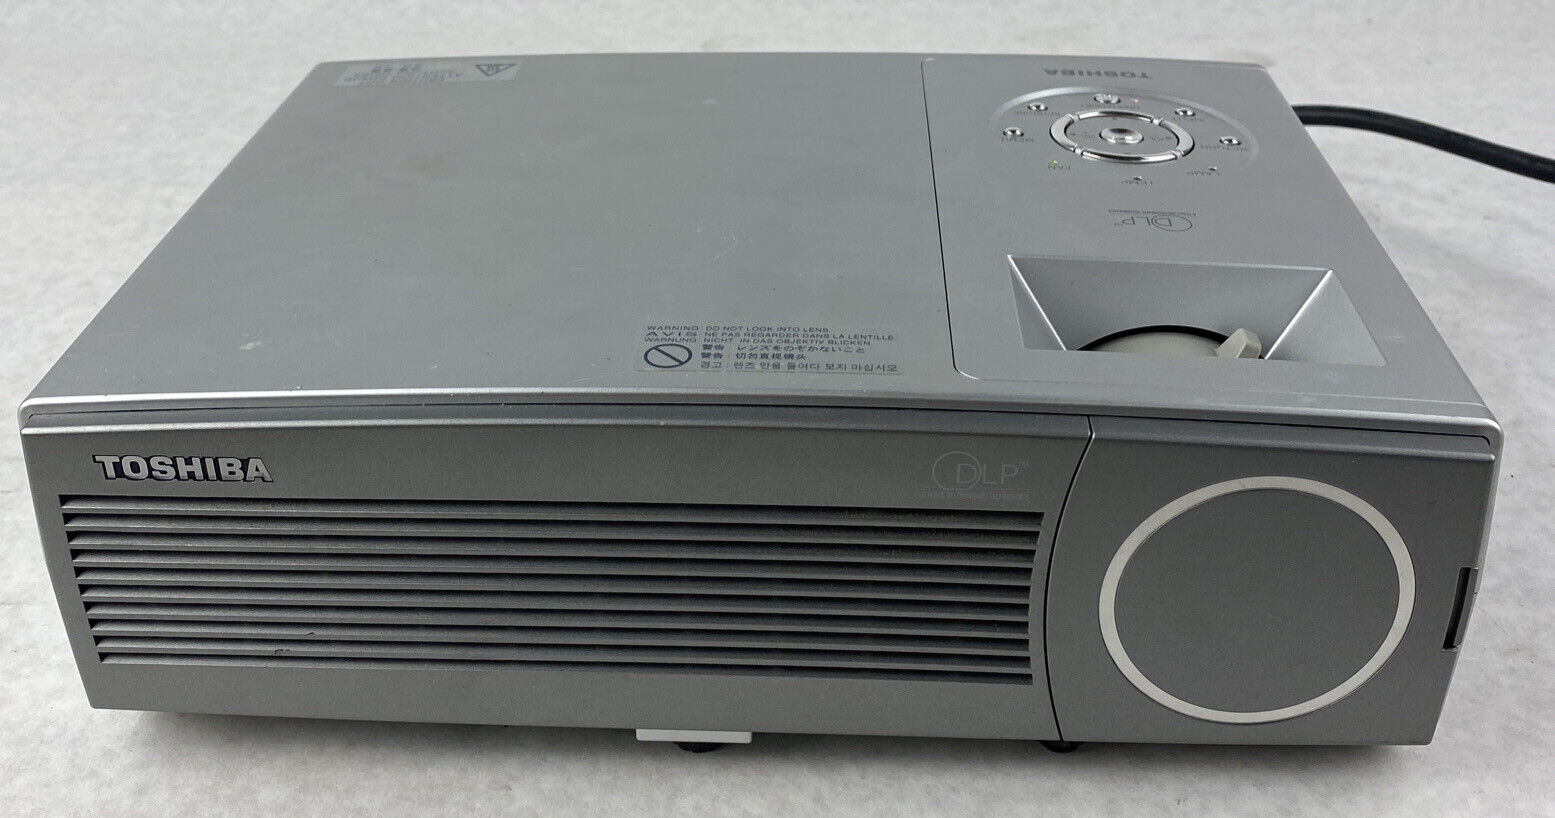 Toshiba TDP-T99 DLP Data Projector ONLY No Accessories No Remote No Case